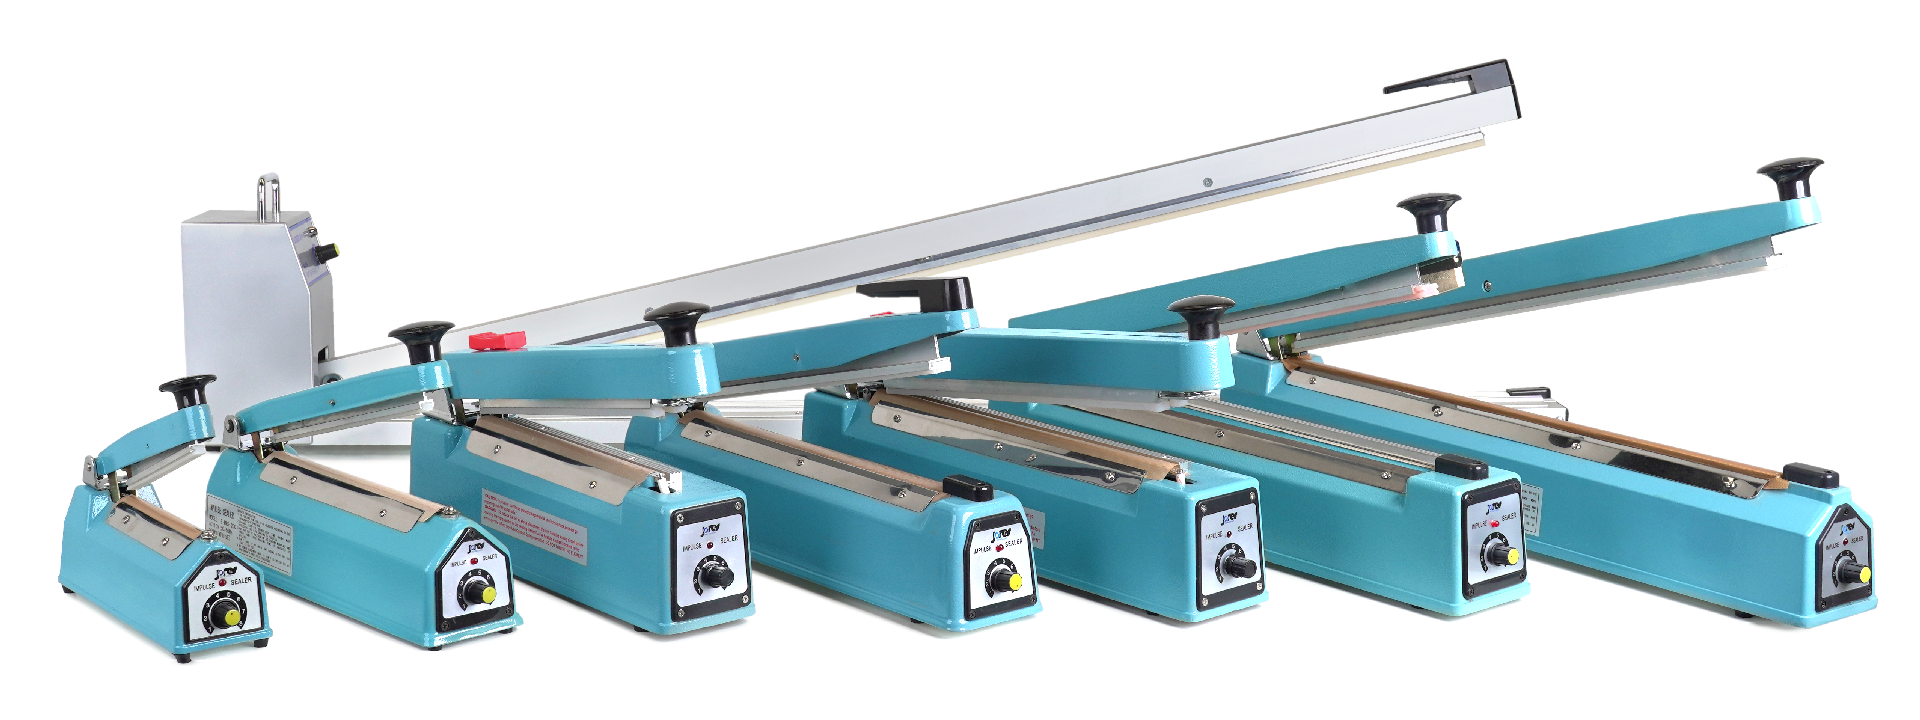 multiple manual impulse sealers of different sizes lined up one next to the other